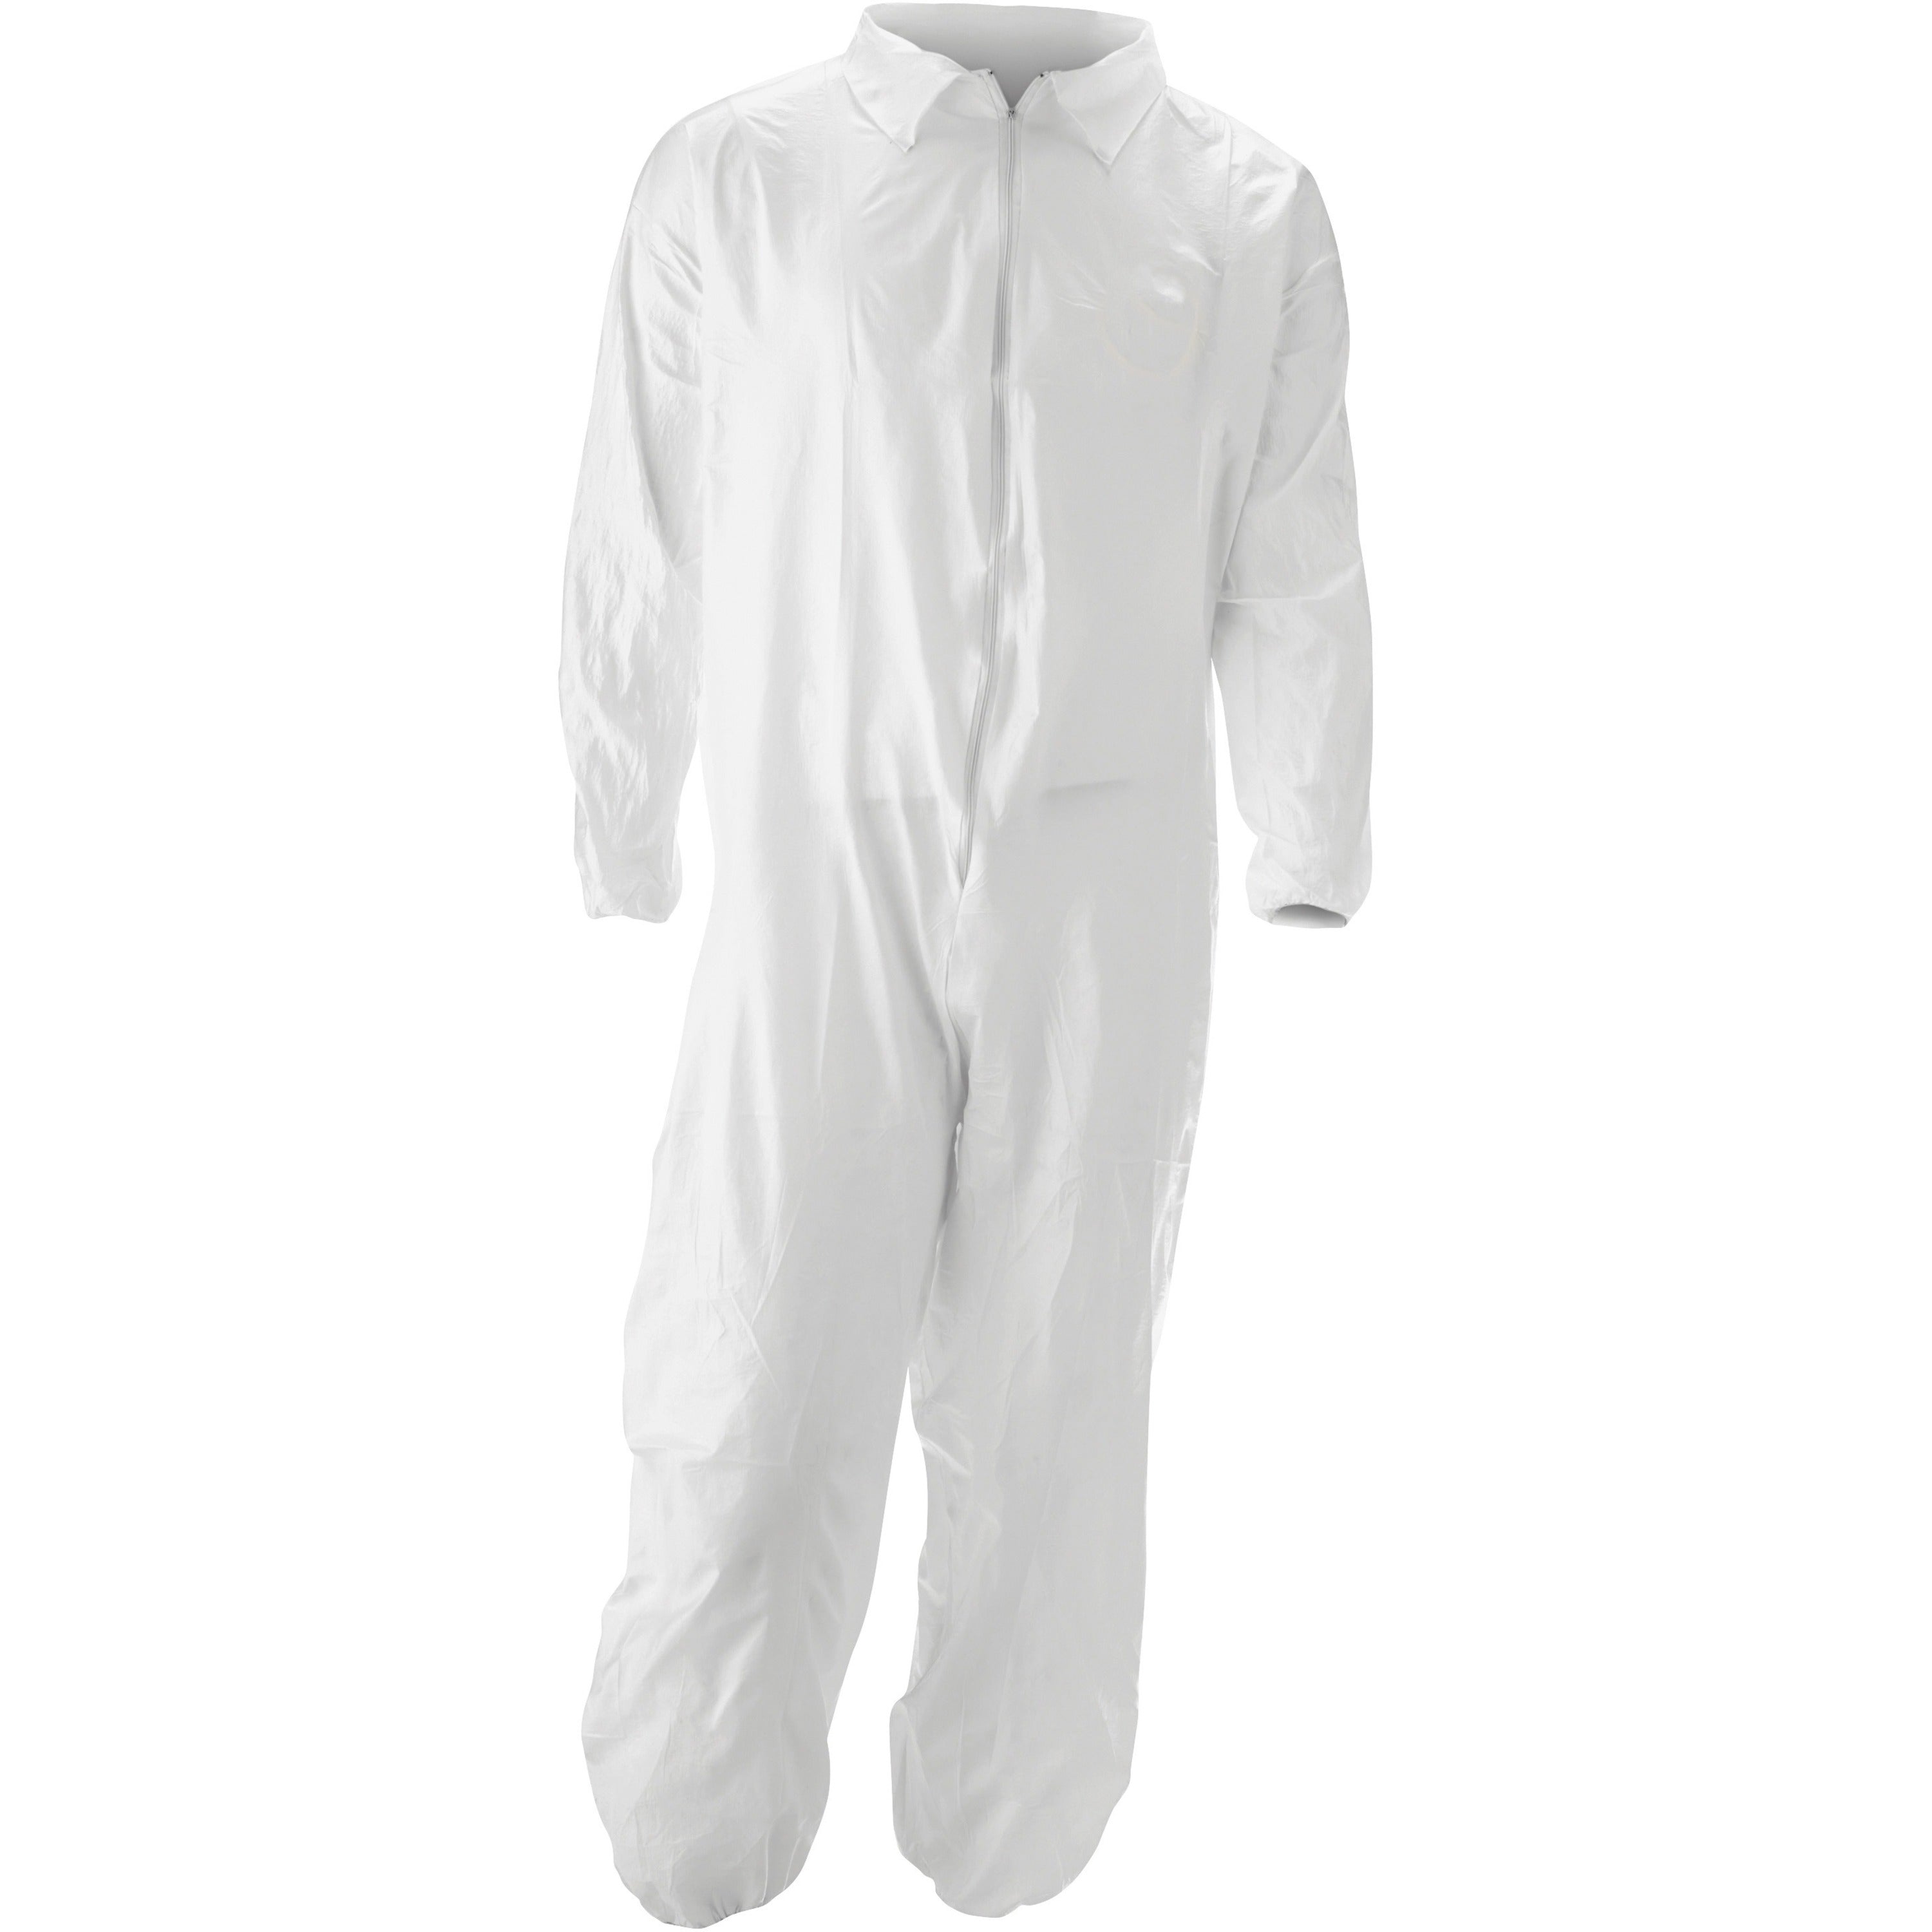 malt-promax-coverall-recommended-for-chemical-painting-food-processing-pesticide-spraying-asbestos-abatement-small-size-zipper-closure-polyolefin-white-25-carton_impm1017s - 1